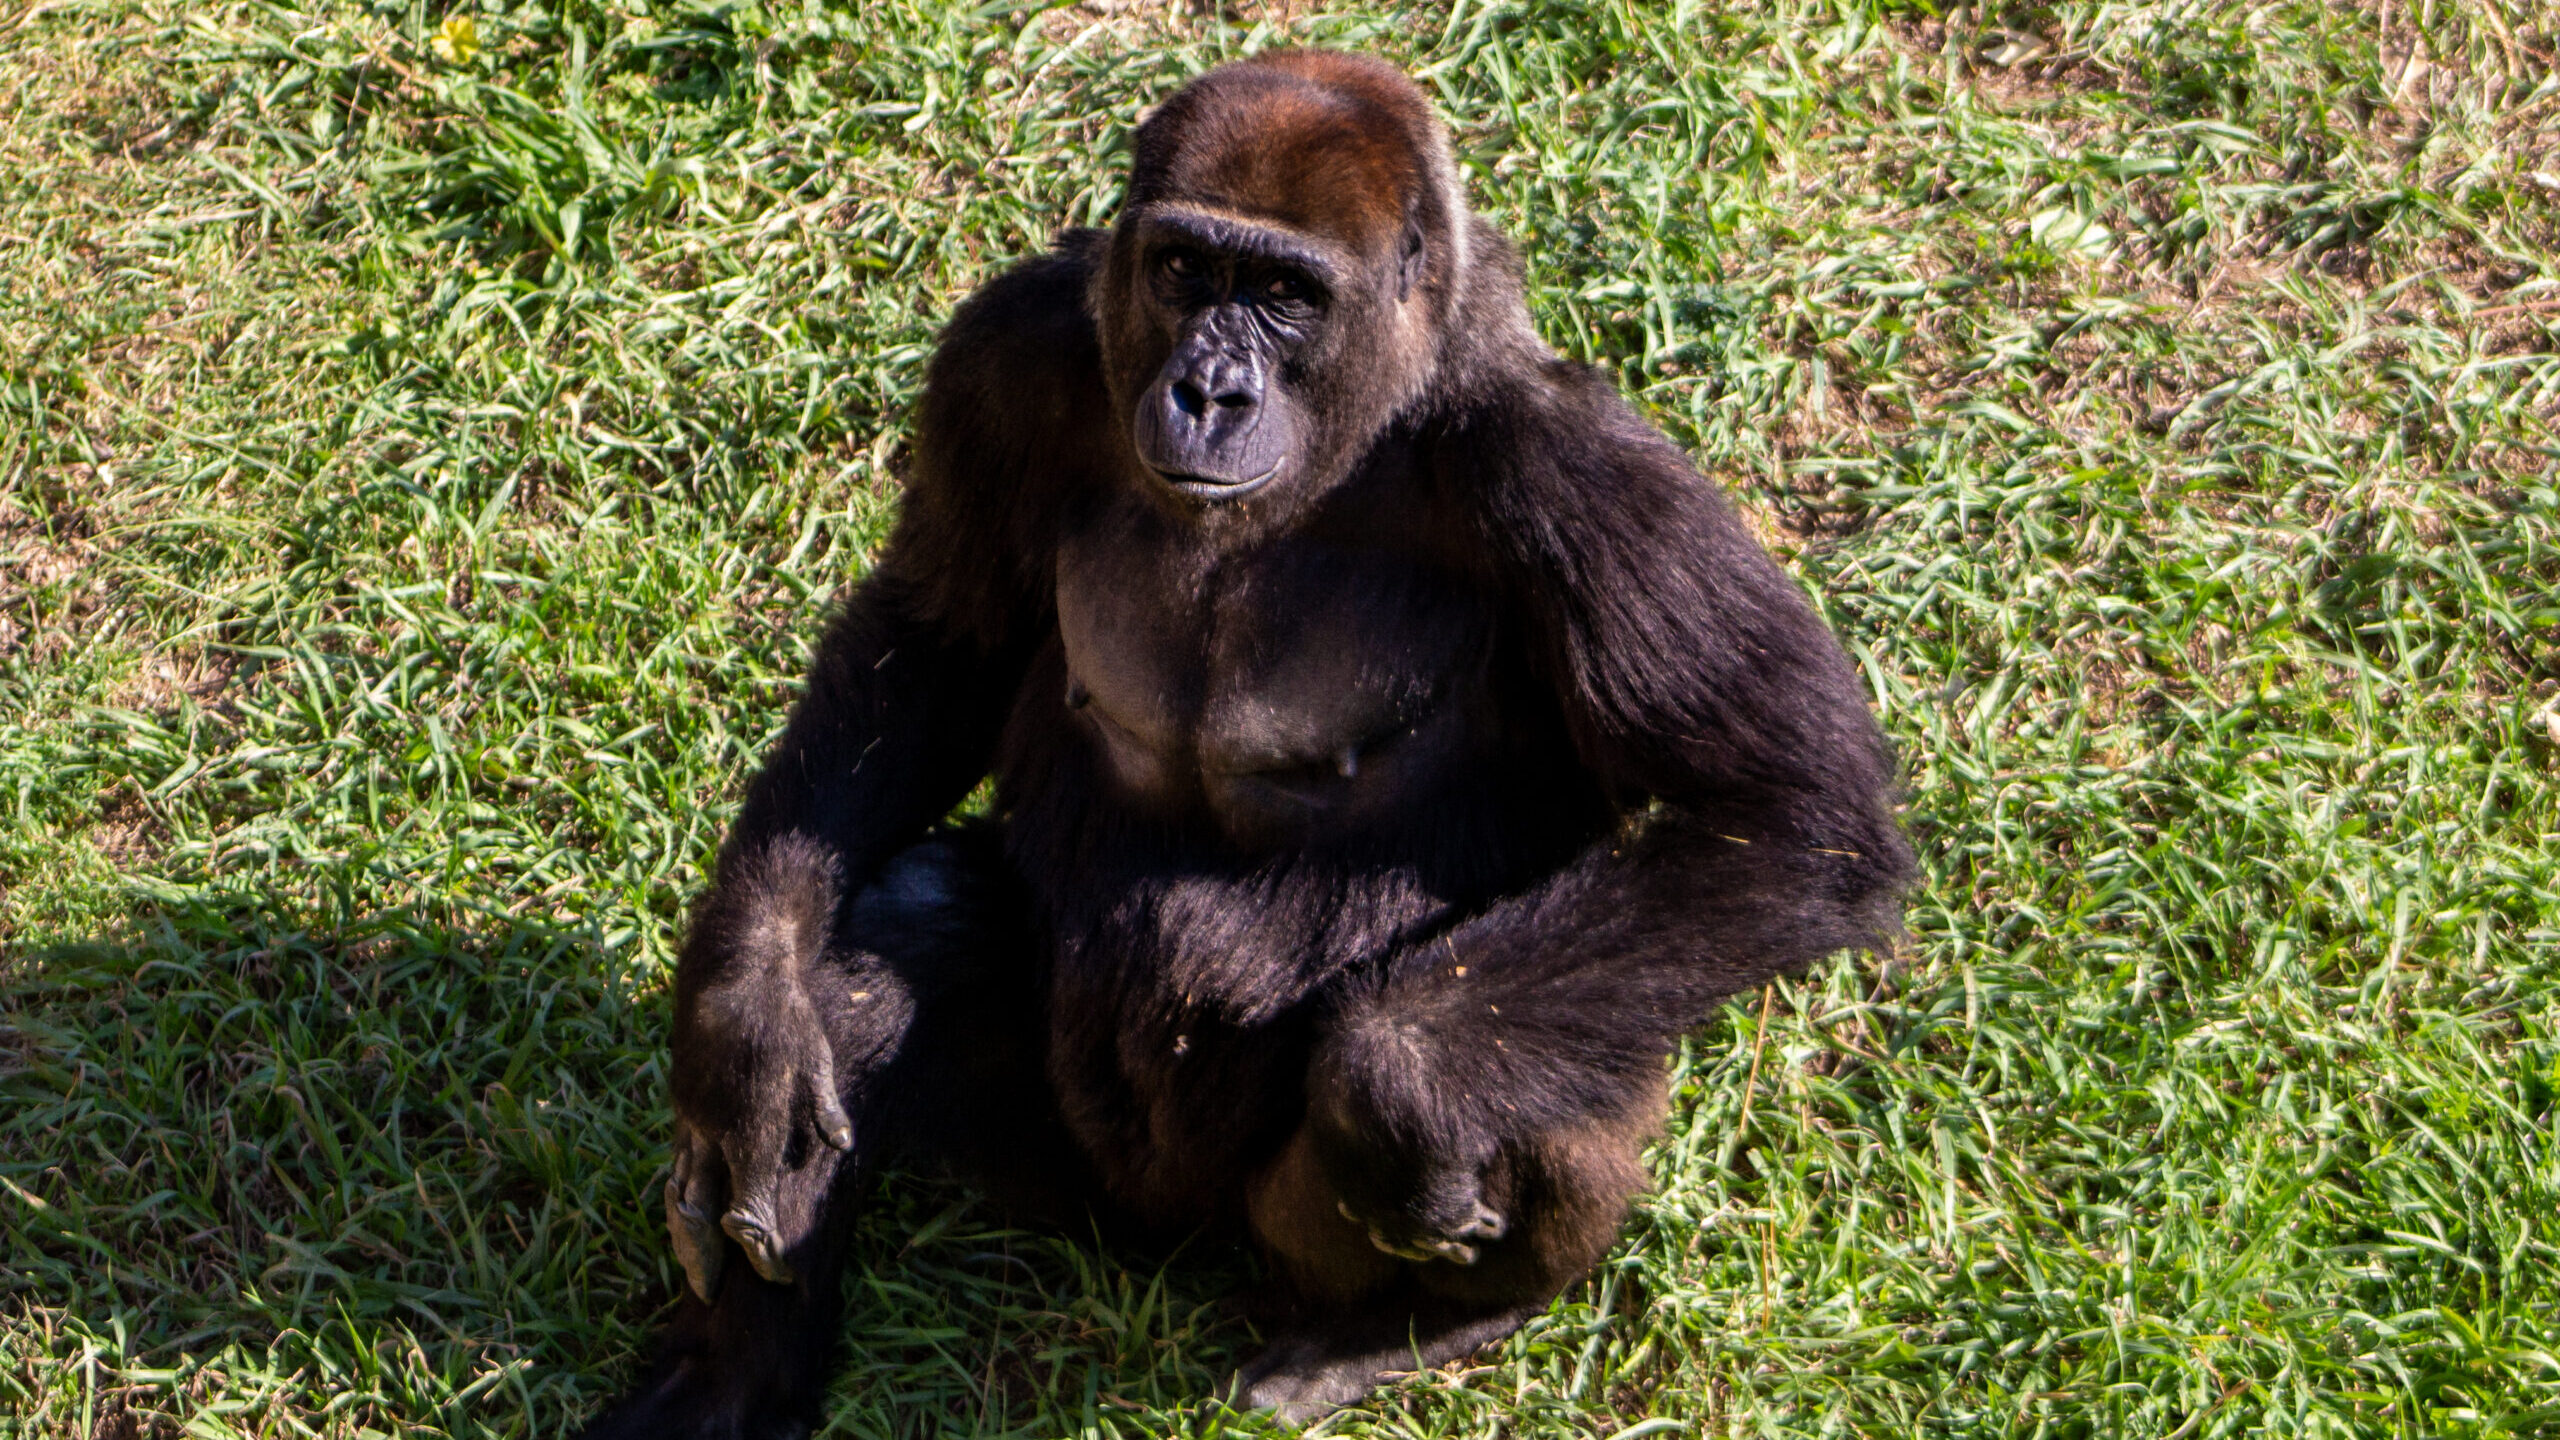 Pele, a gorilla and expectant mother at Hogle Zoo...